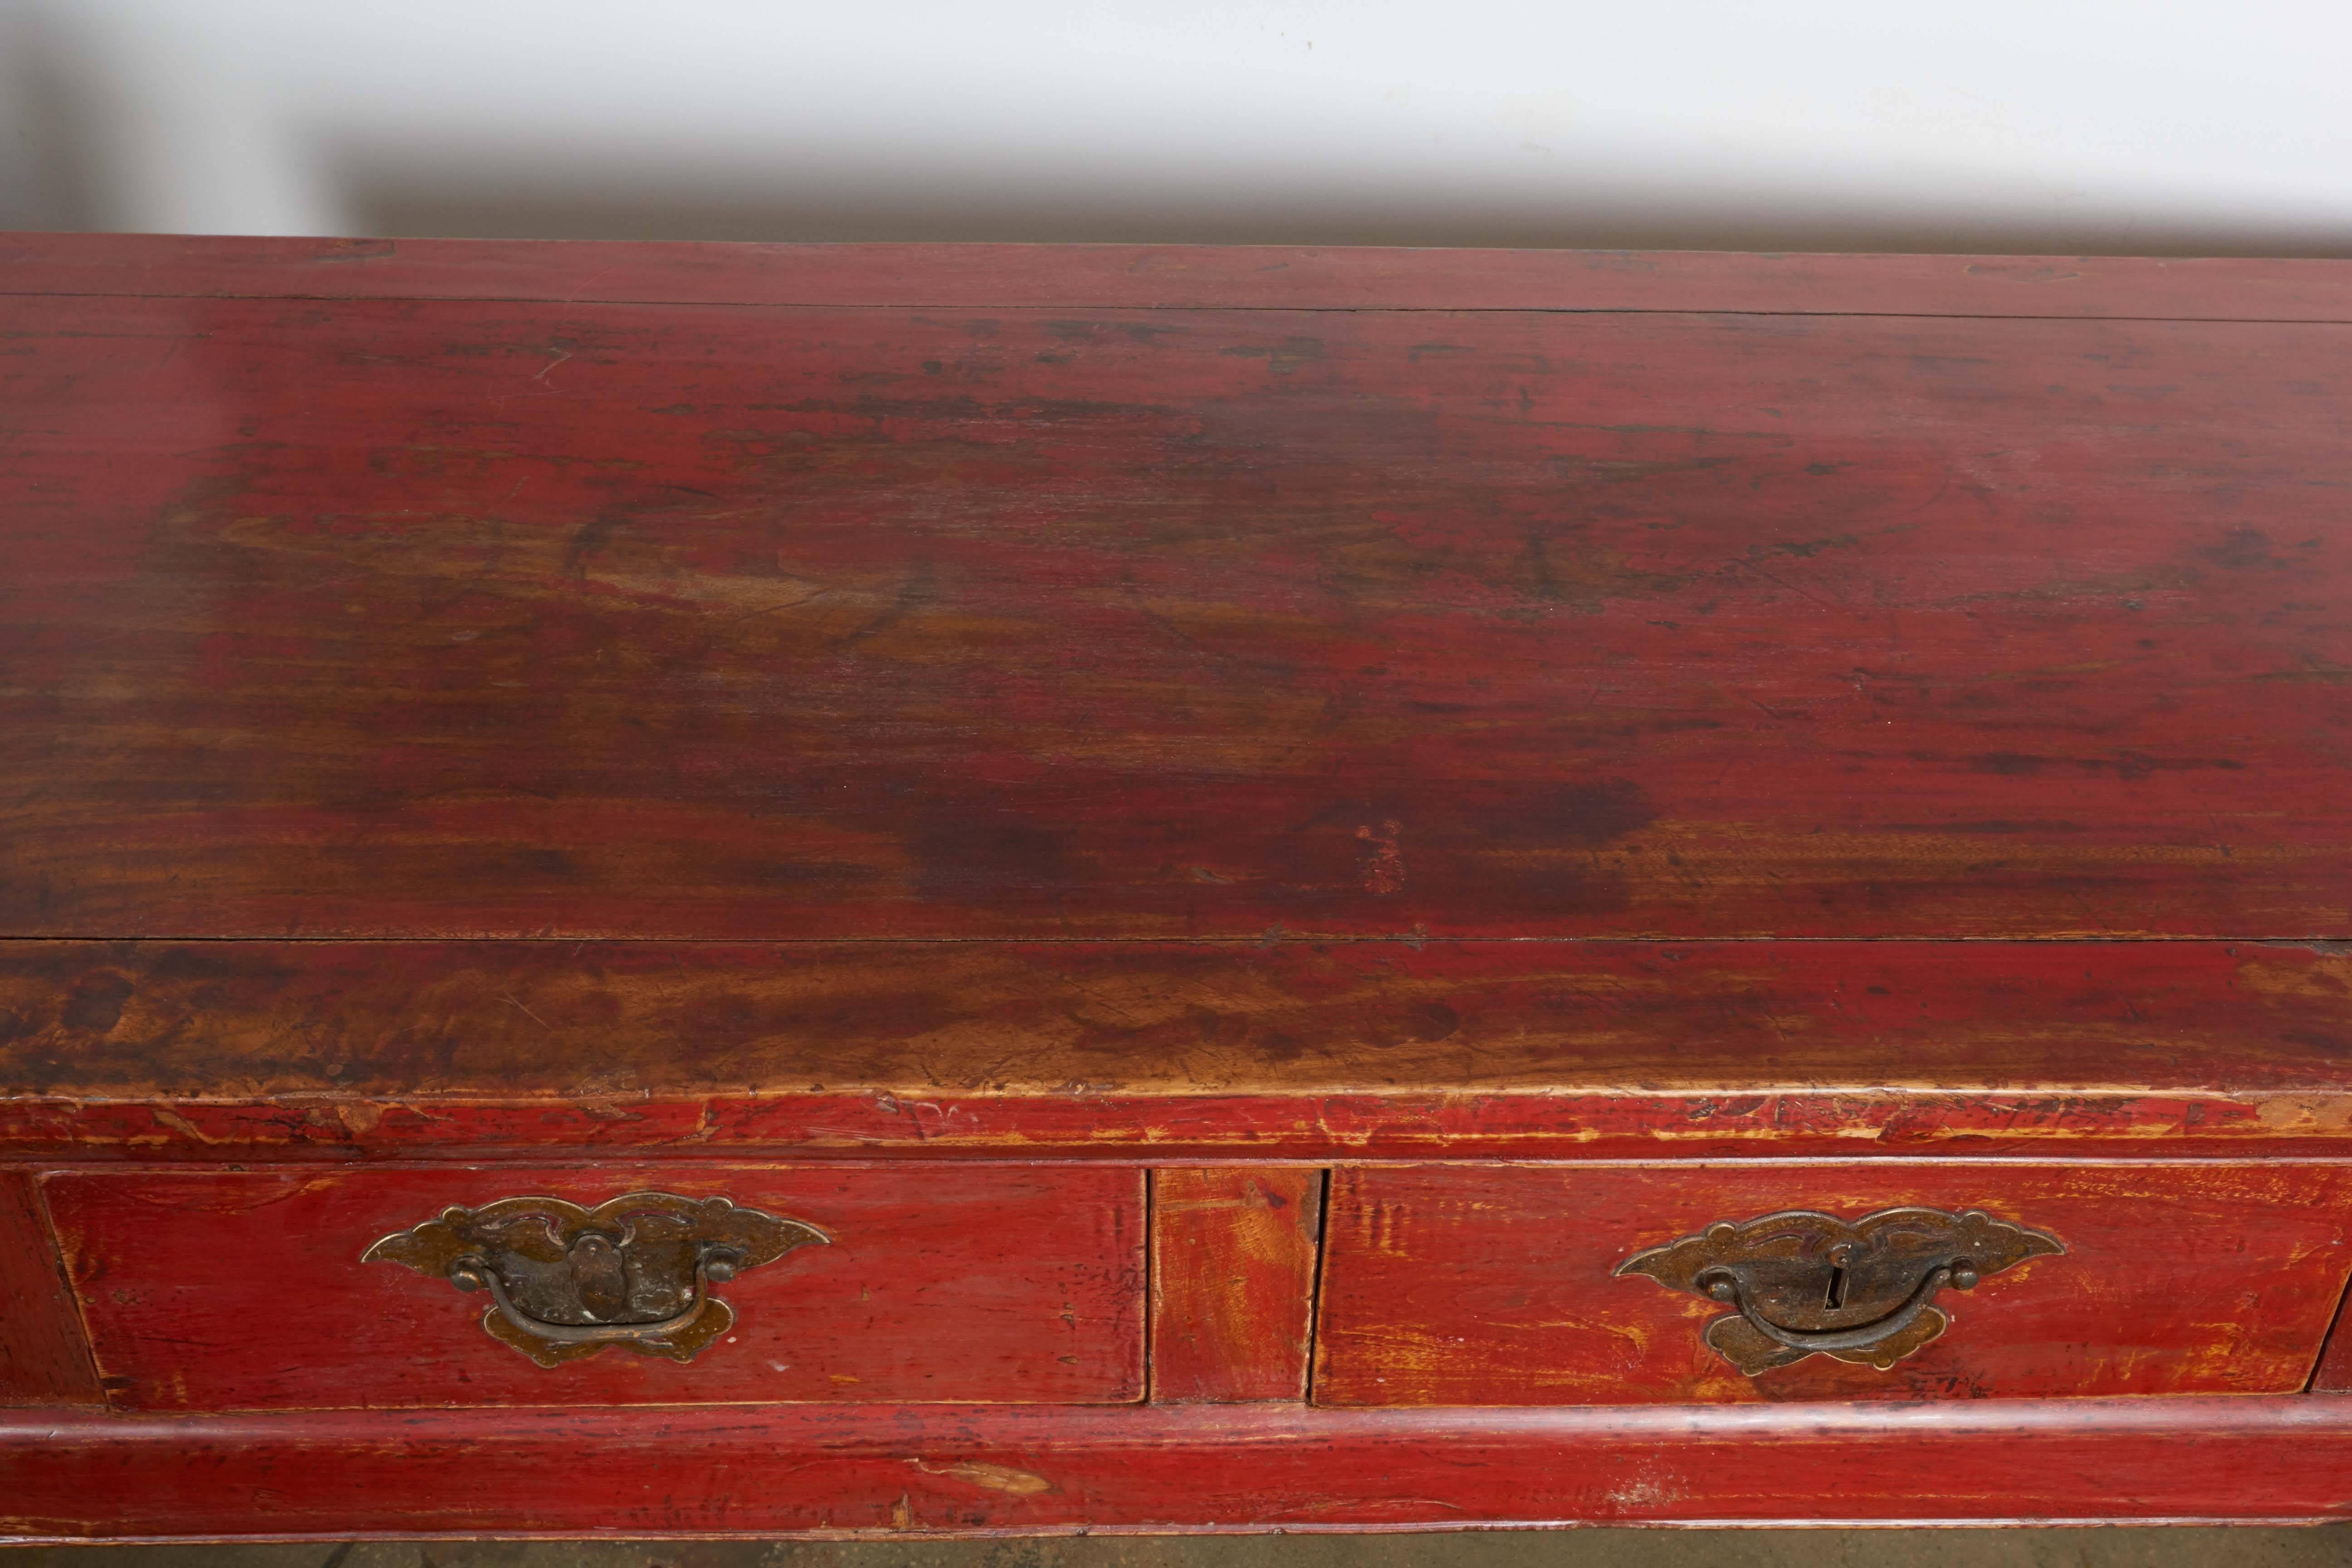 A red lacquered four-drawer scholar's desk, original hardware, peach wood, Zheklang.